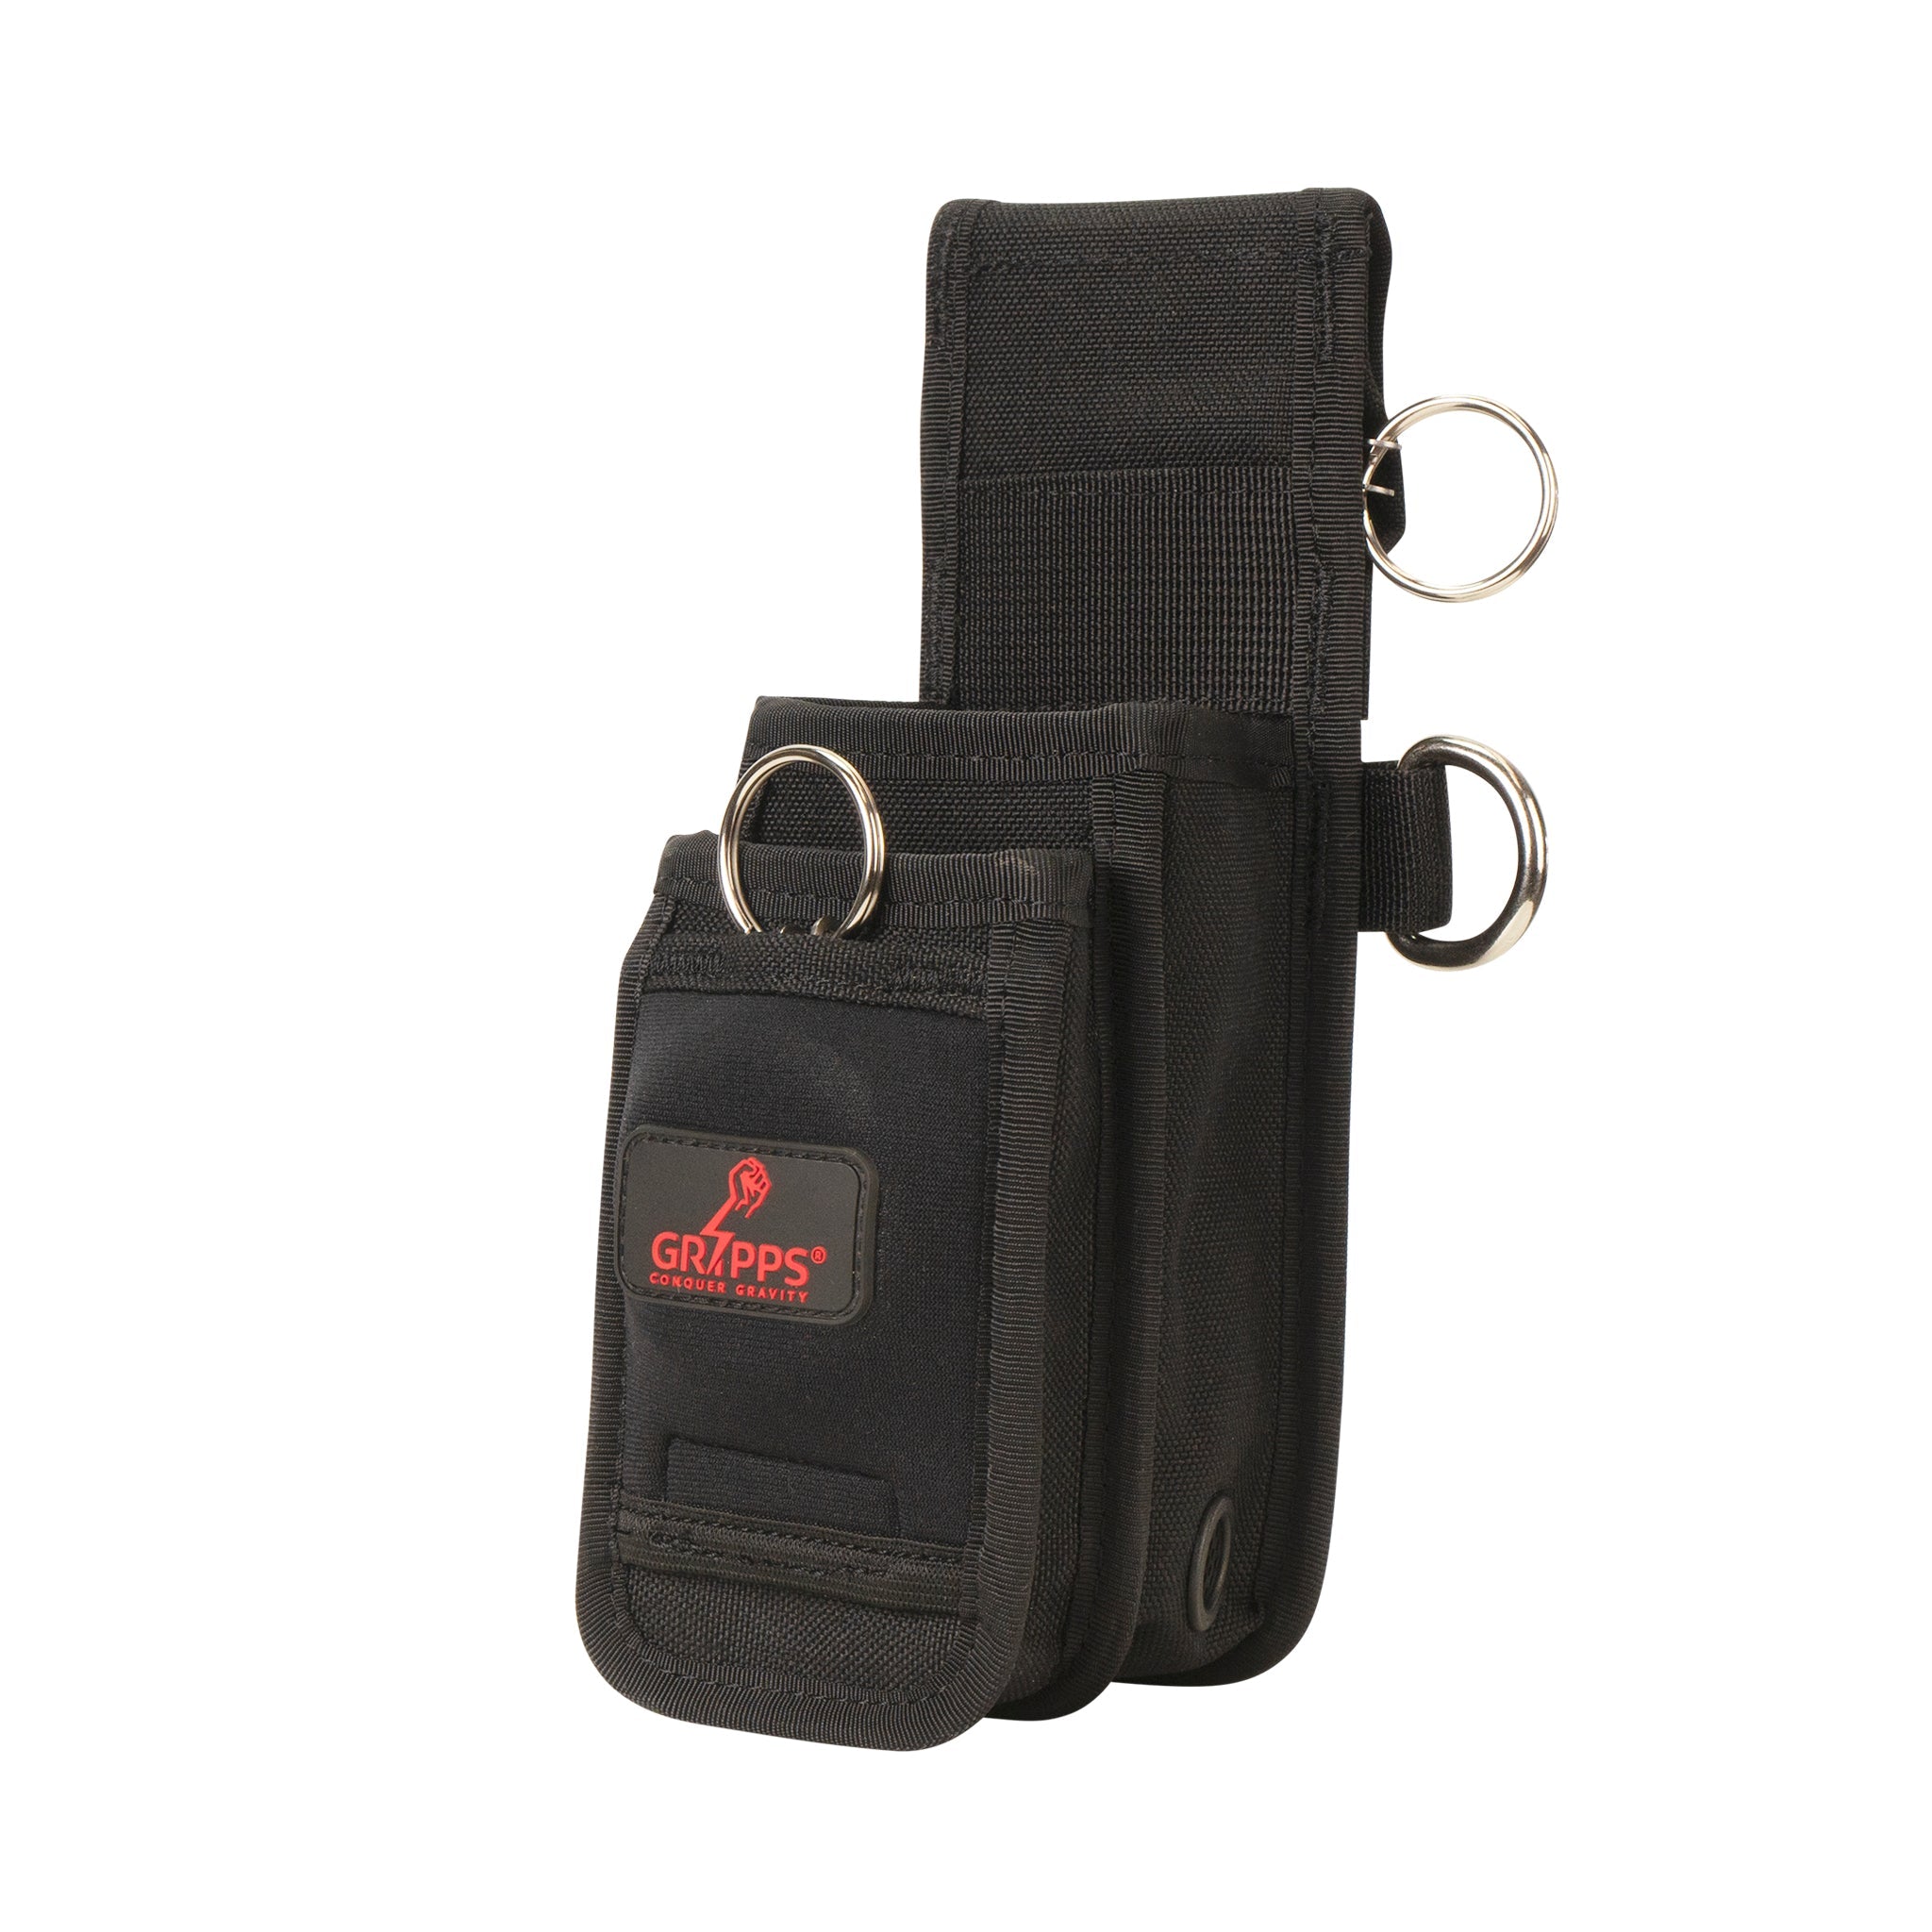 Retractable Dual Tool Holster MKII